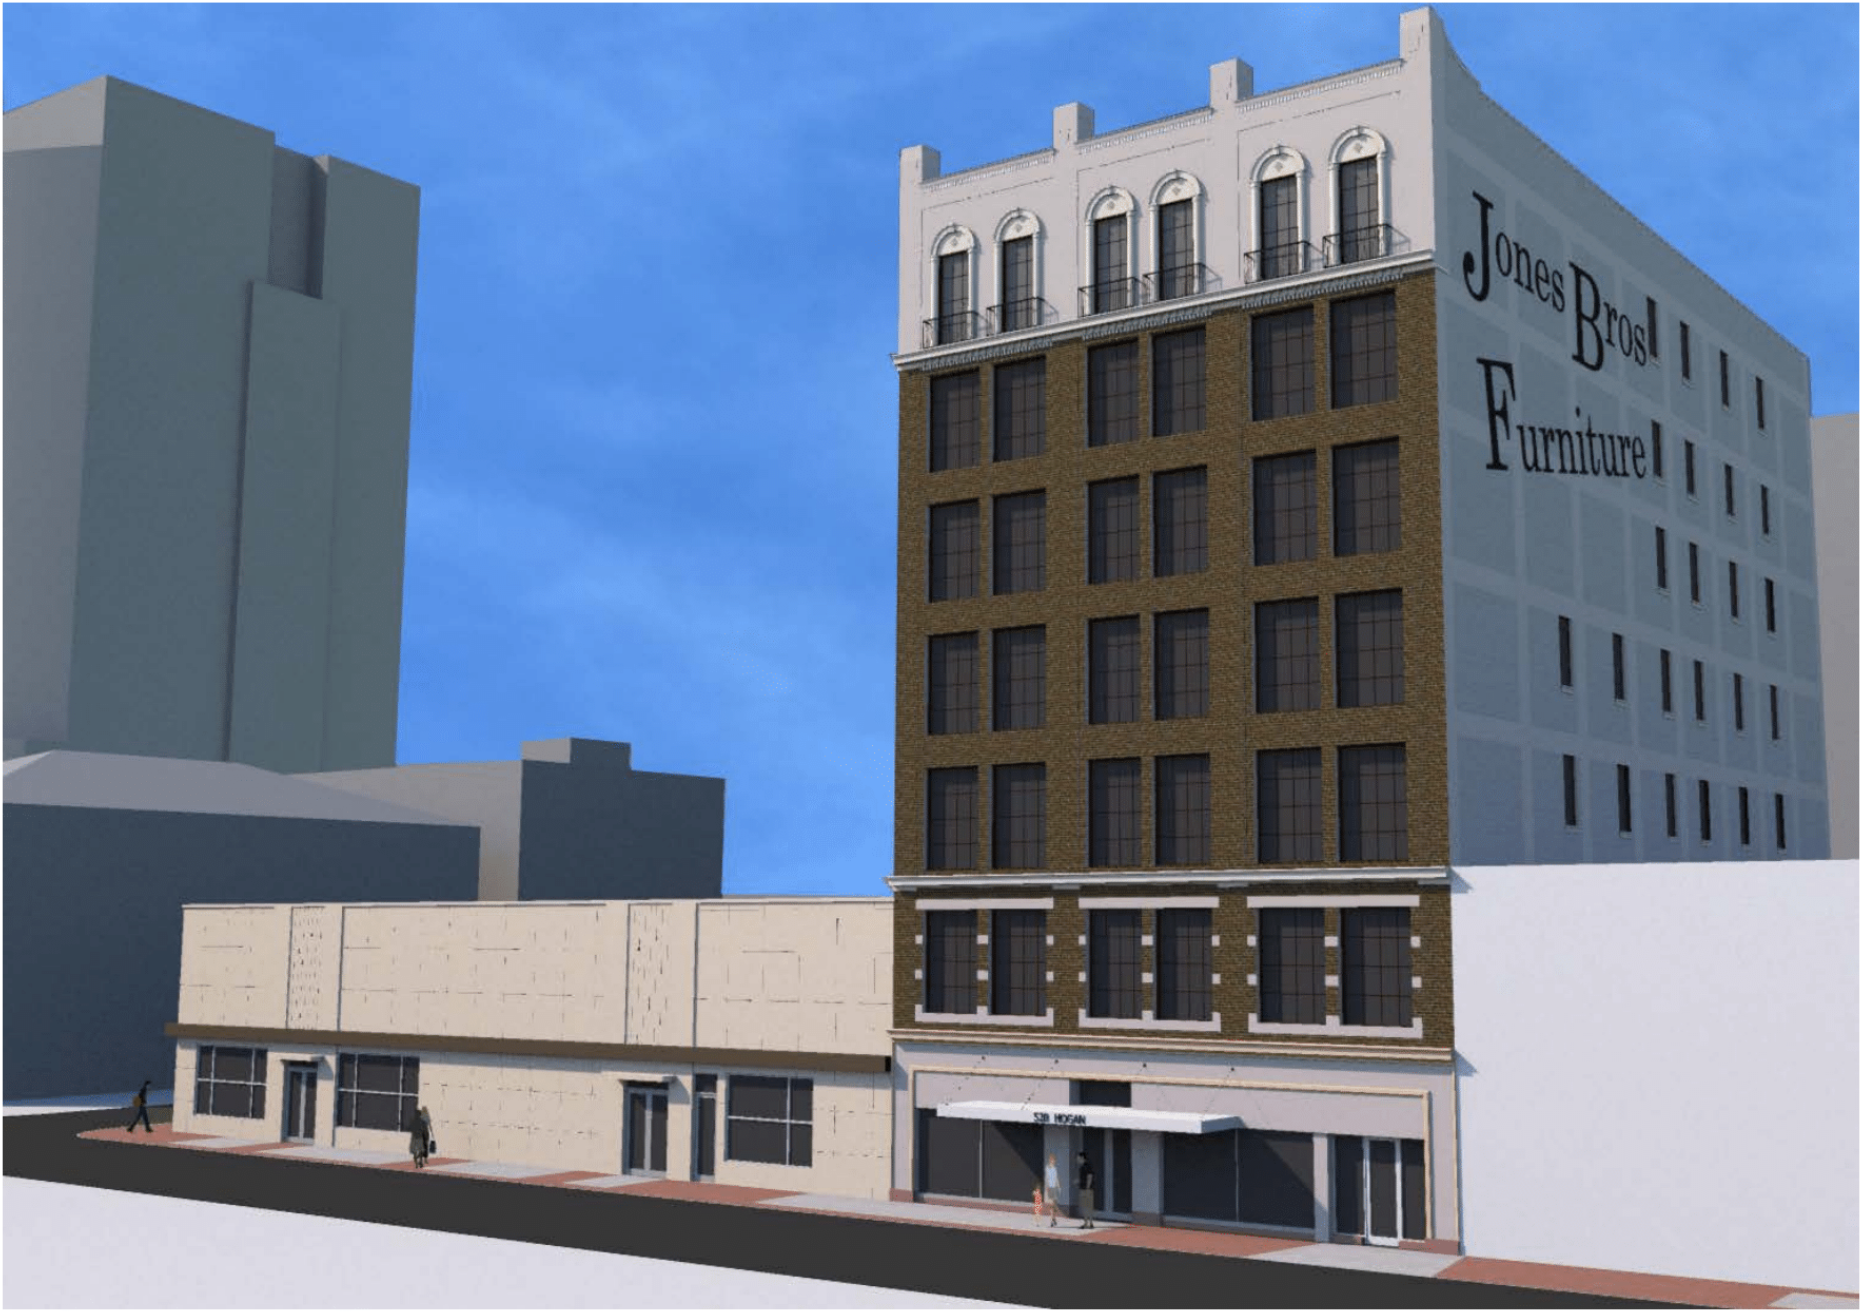 The vacant Jones Brothers Furniture Co. Building could be transformed into apartments, retail and restaurant space.